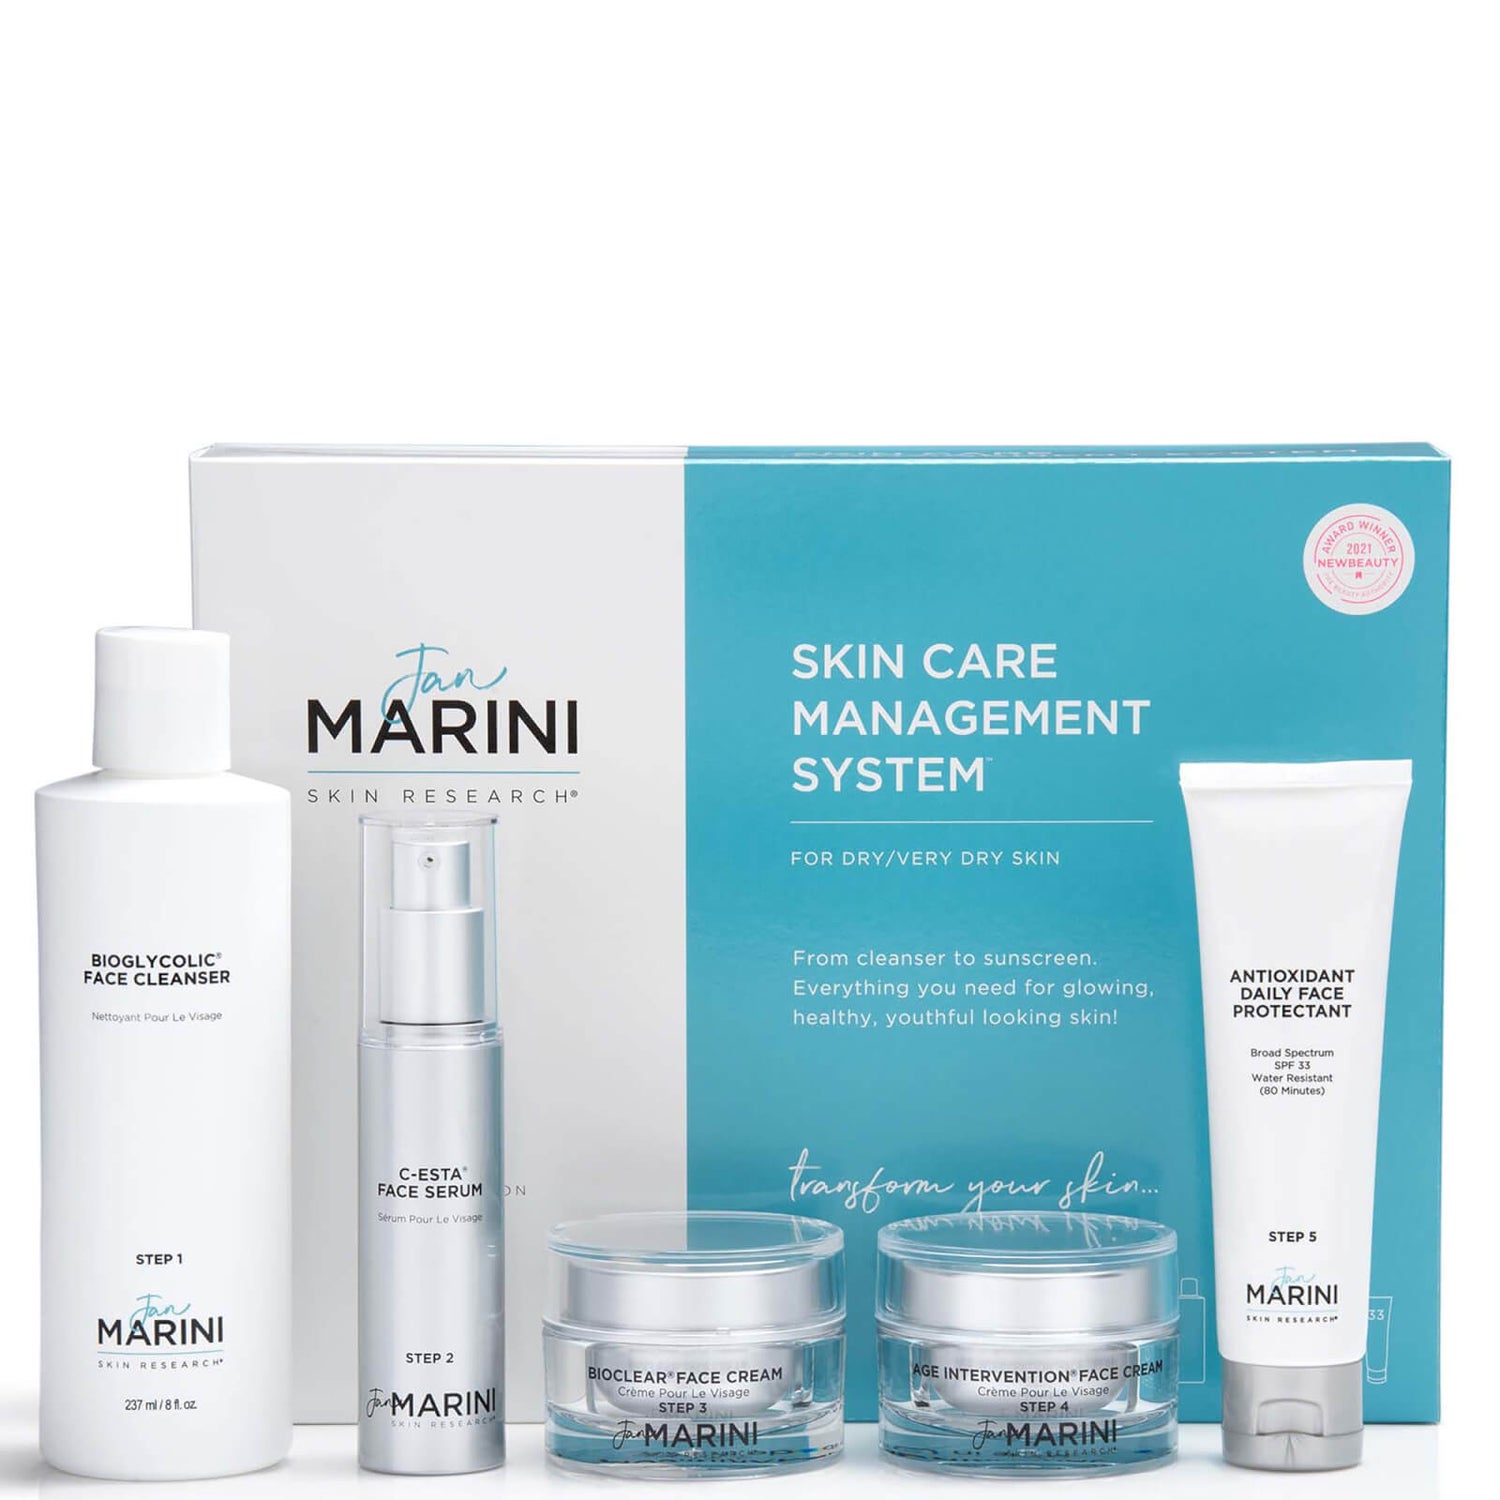 Jan Marini Skin Care Management System - Dry to Very Dry 5 piece